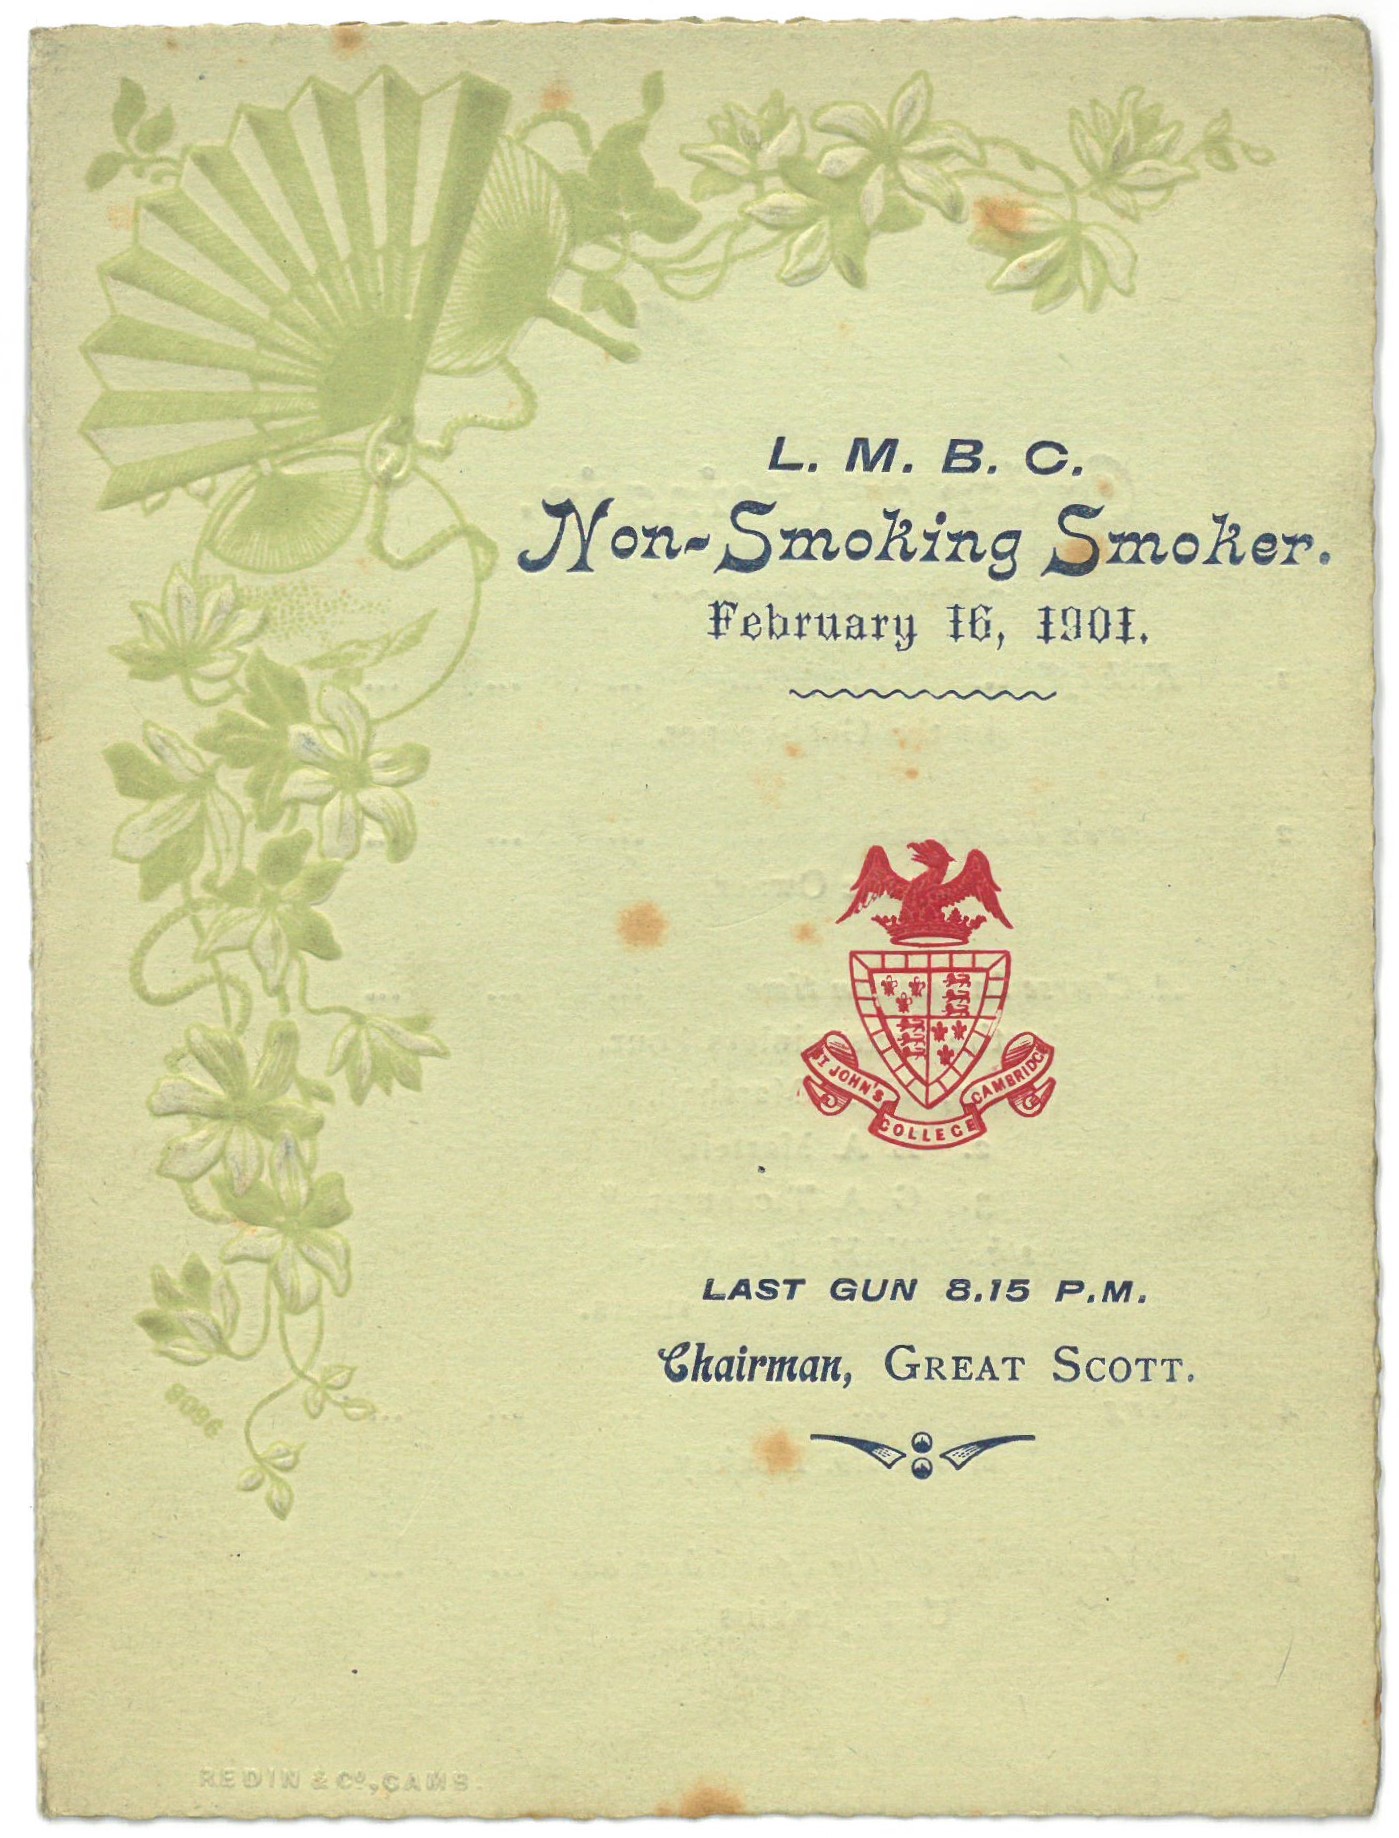 Concert programme cover, 1901